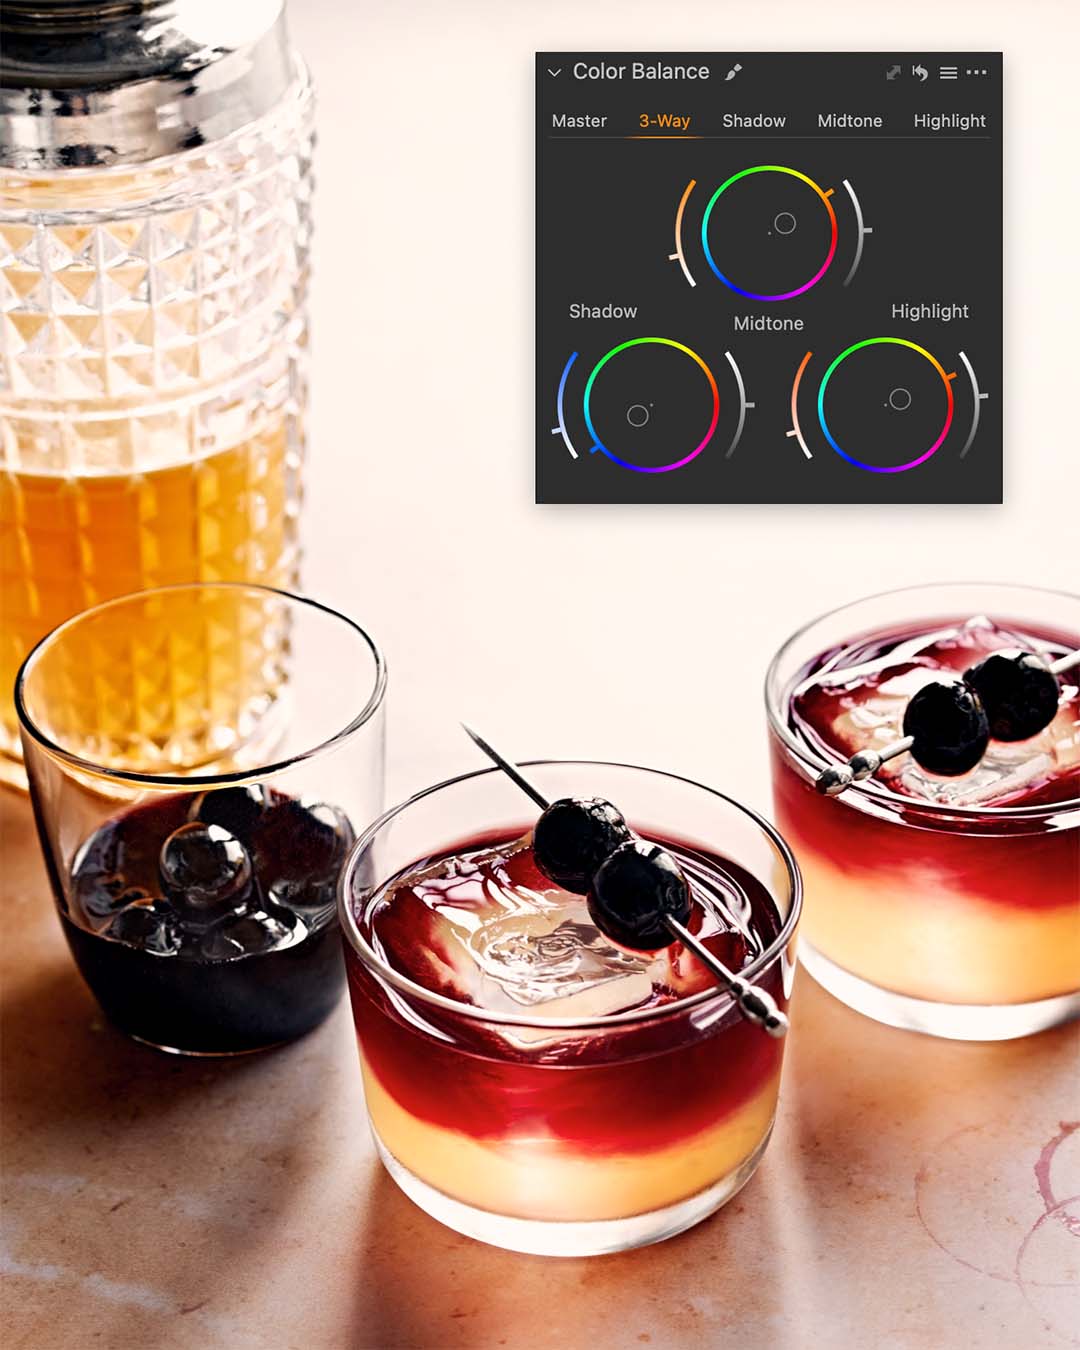 3 Simple Ways to Use Color Grading in Food Photography